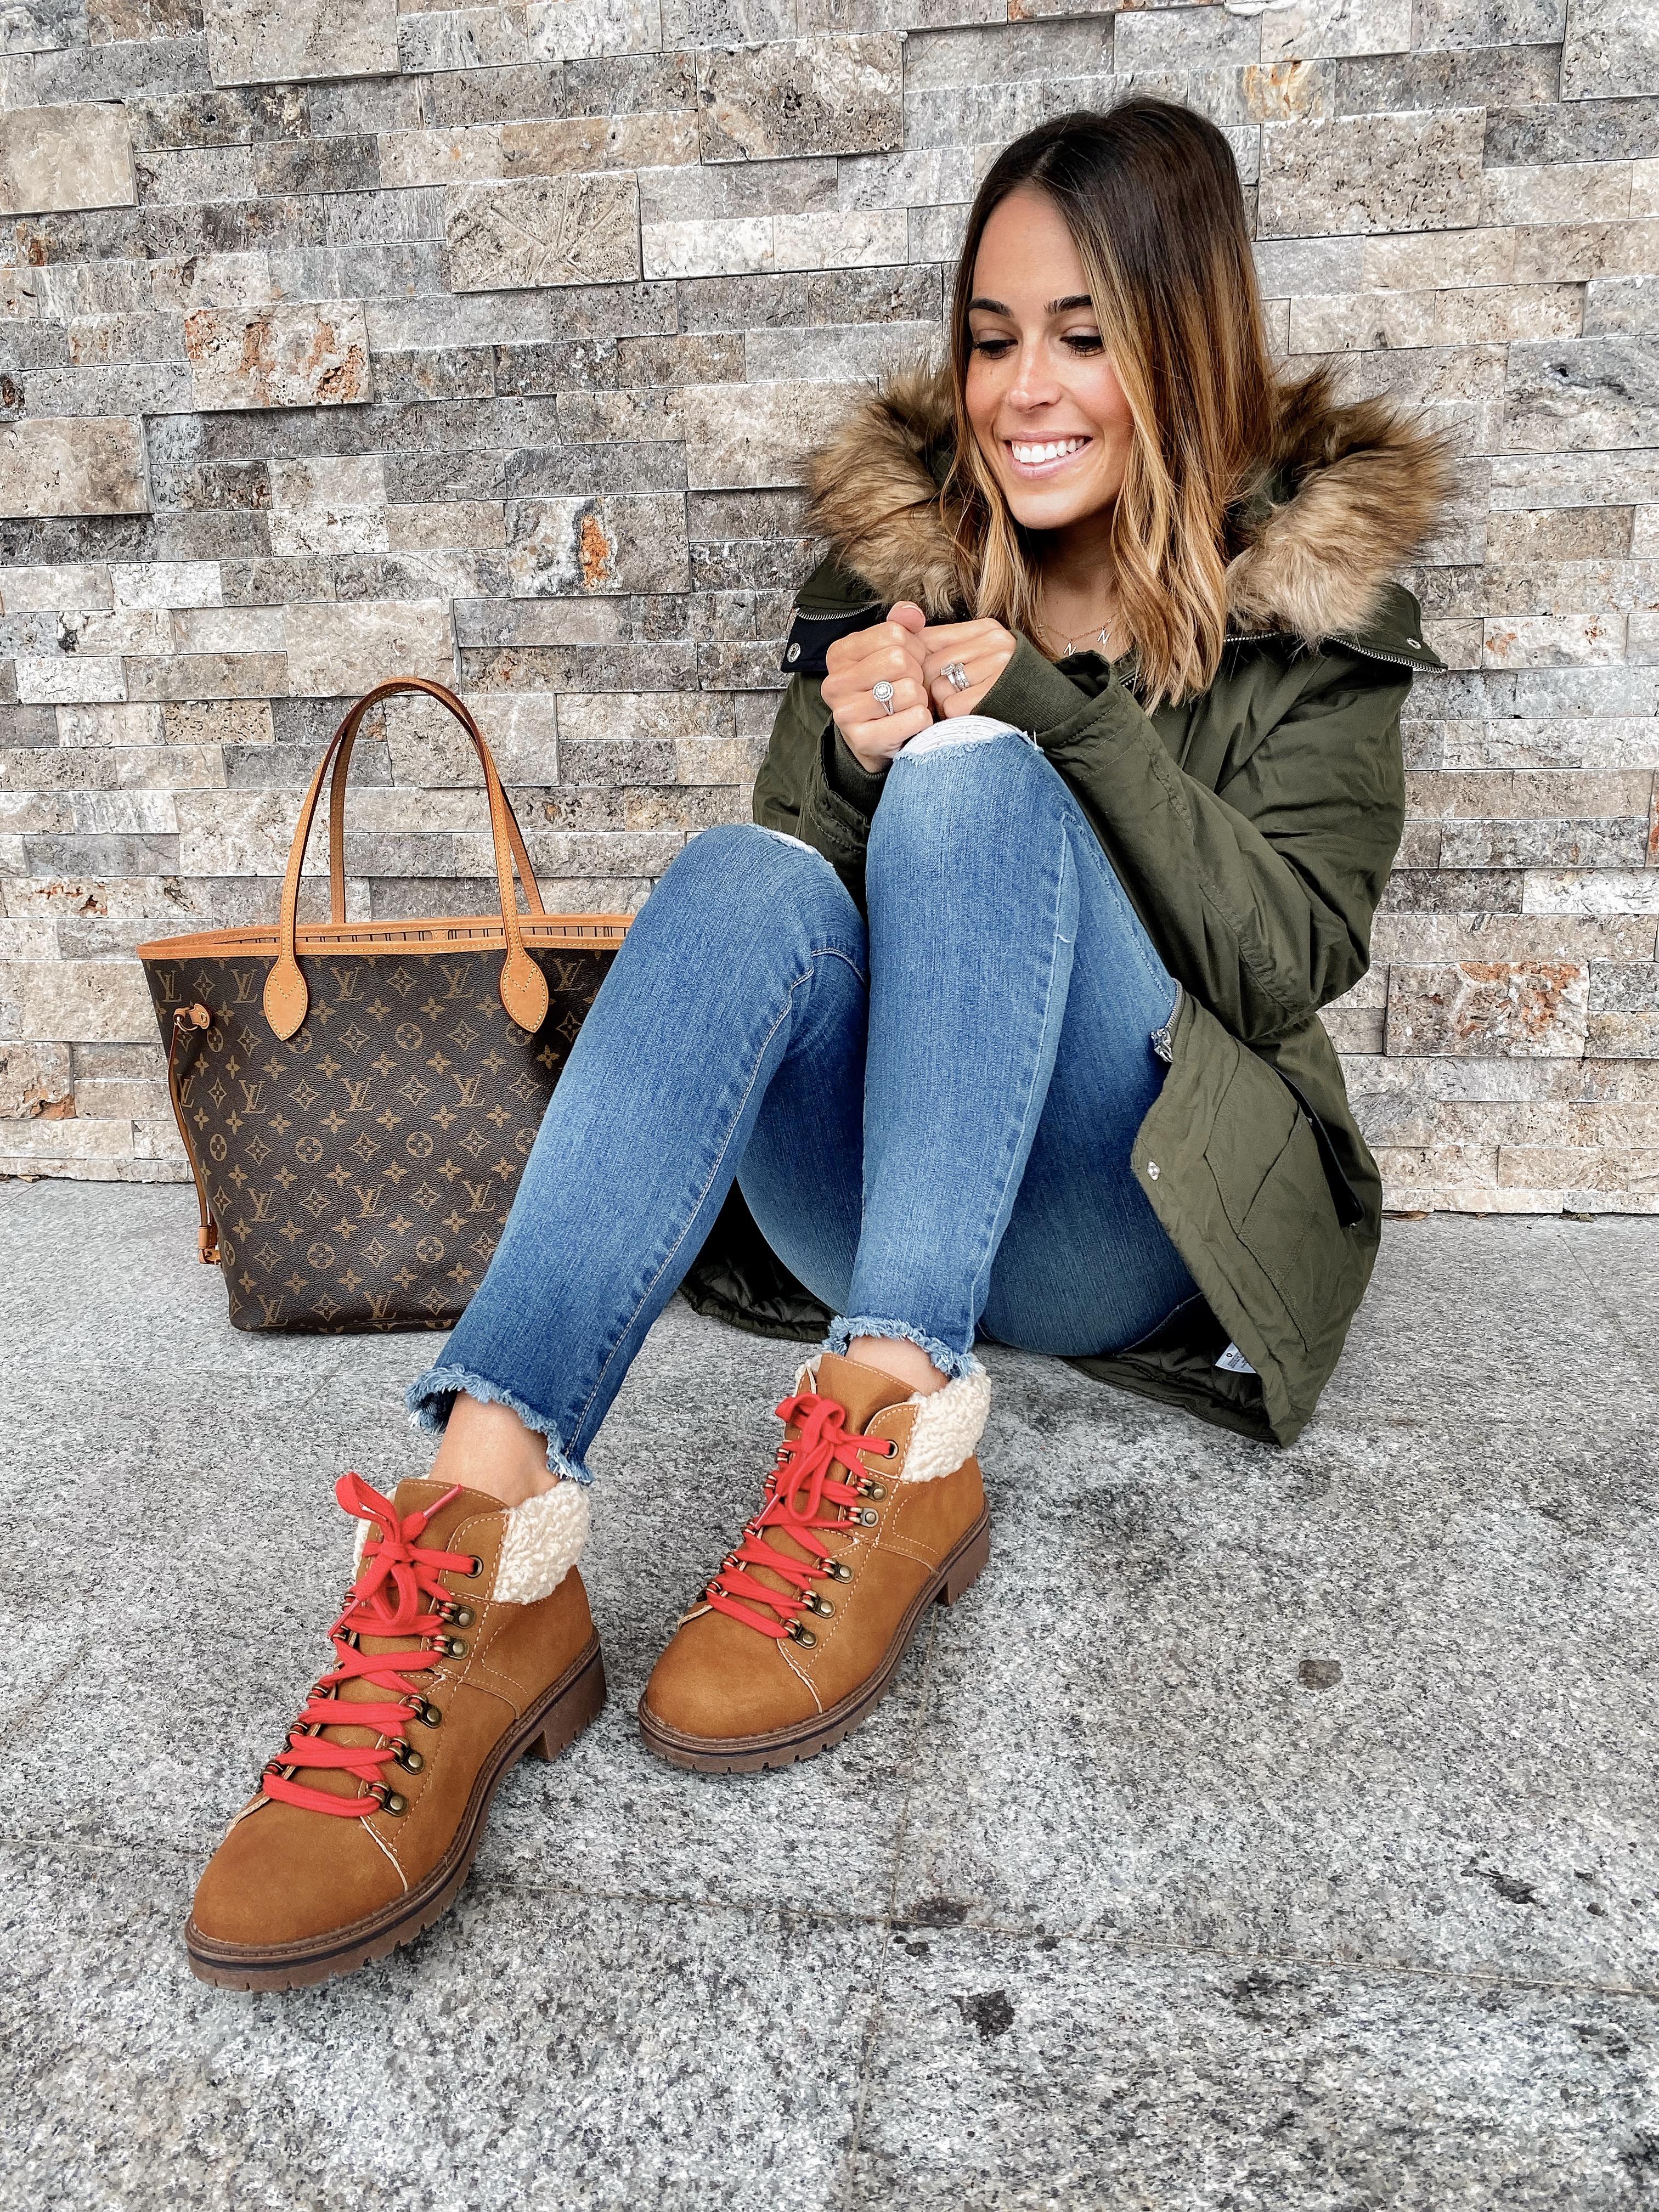 UGG Boots at an Amazing Price, MrsCasual